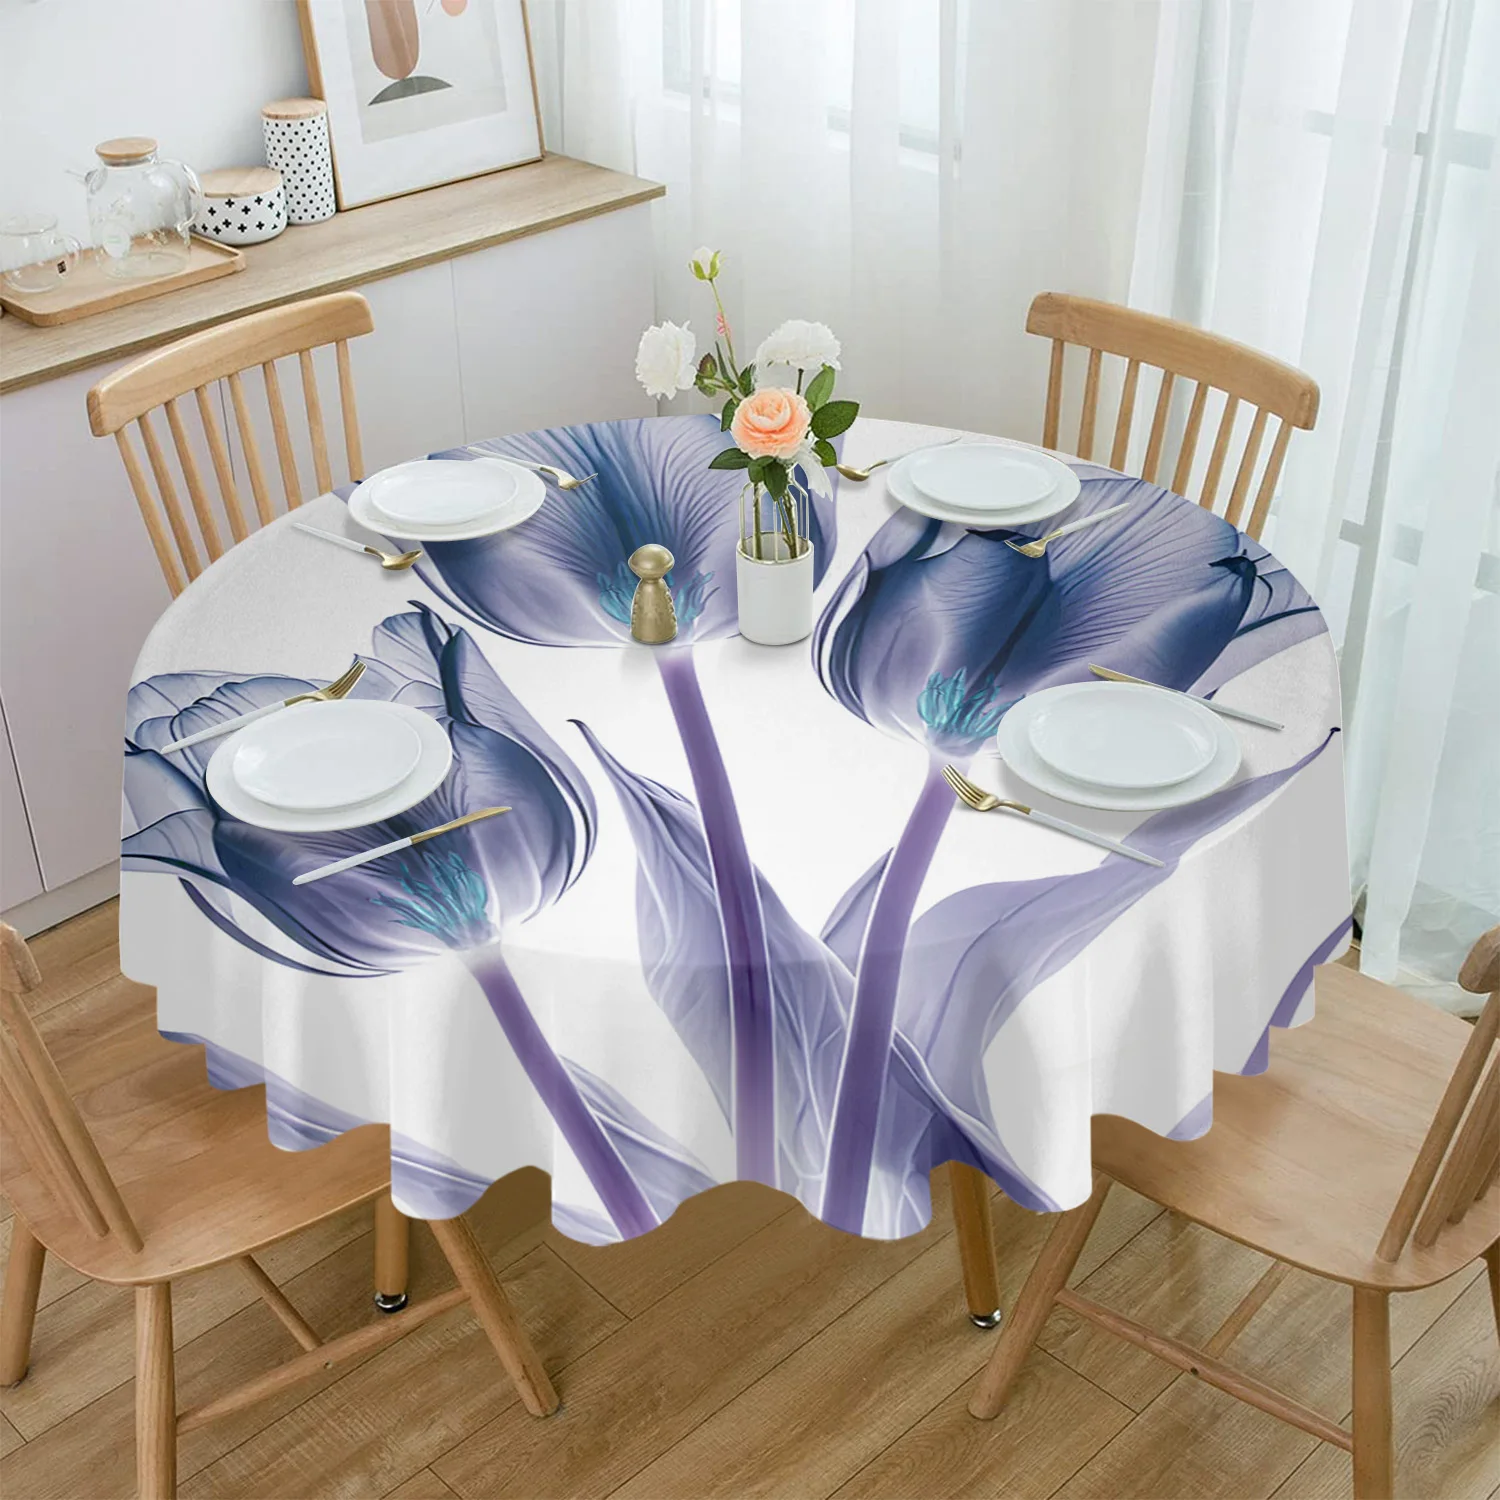 

Flower Tulip Transparent Abstract Round Tablecloth Party Kitchen Dinner Table Cover Holiday Decor Waterproof Tablecloths